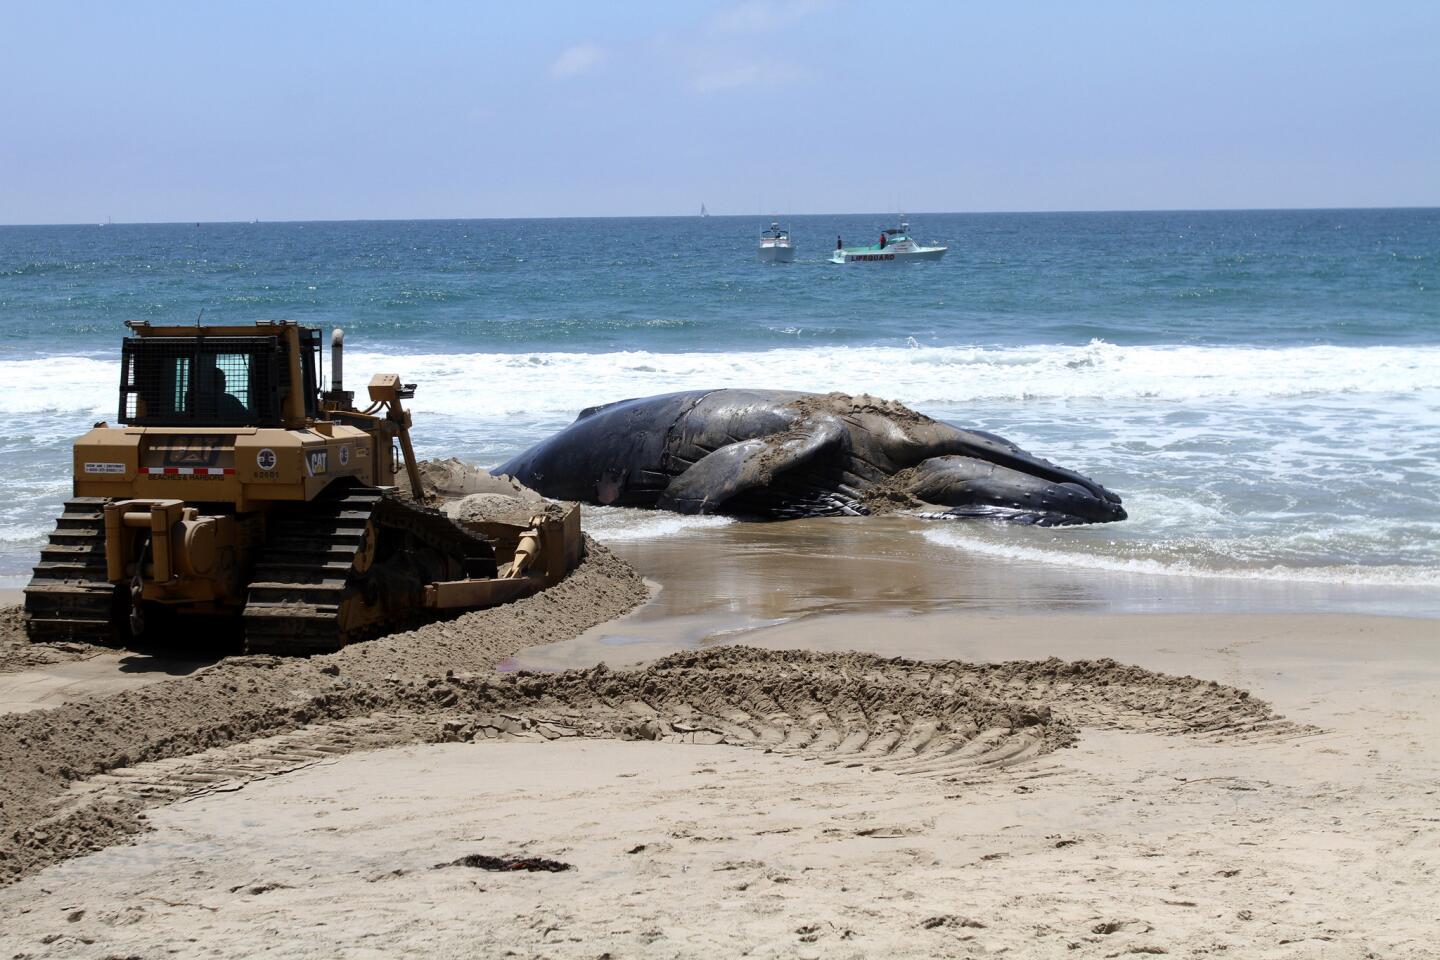 Photo Gallery: Dead Humpback whale washes up on shore at Dockweiler State Beach